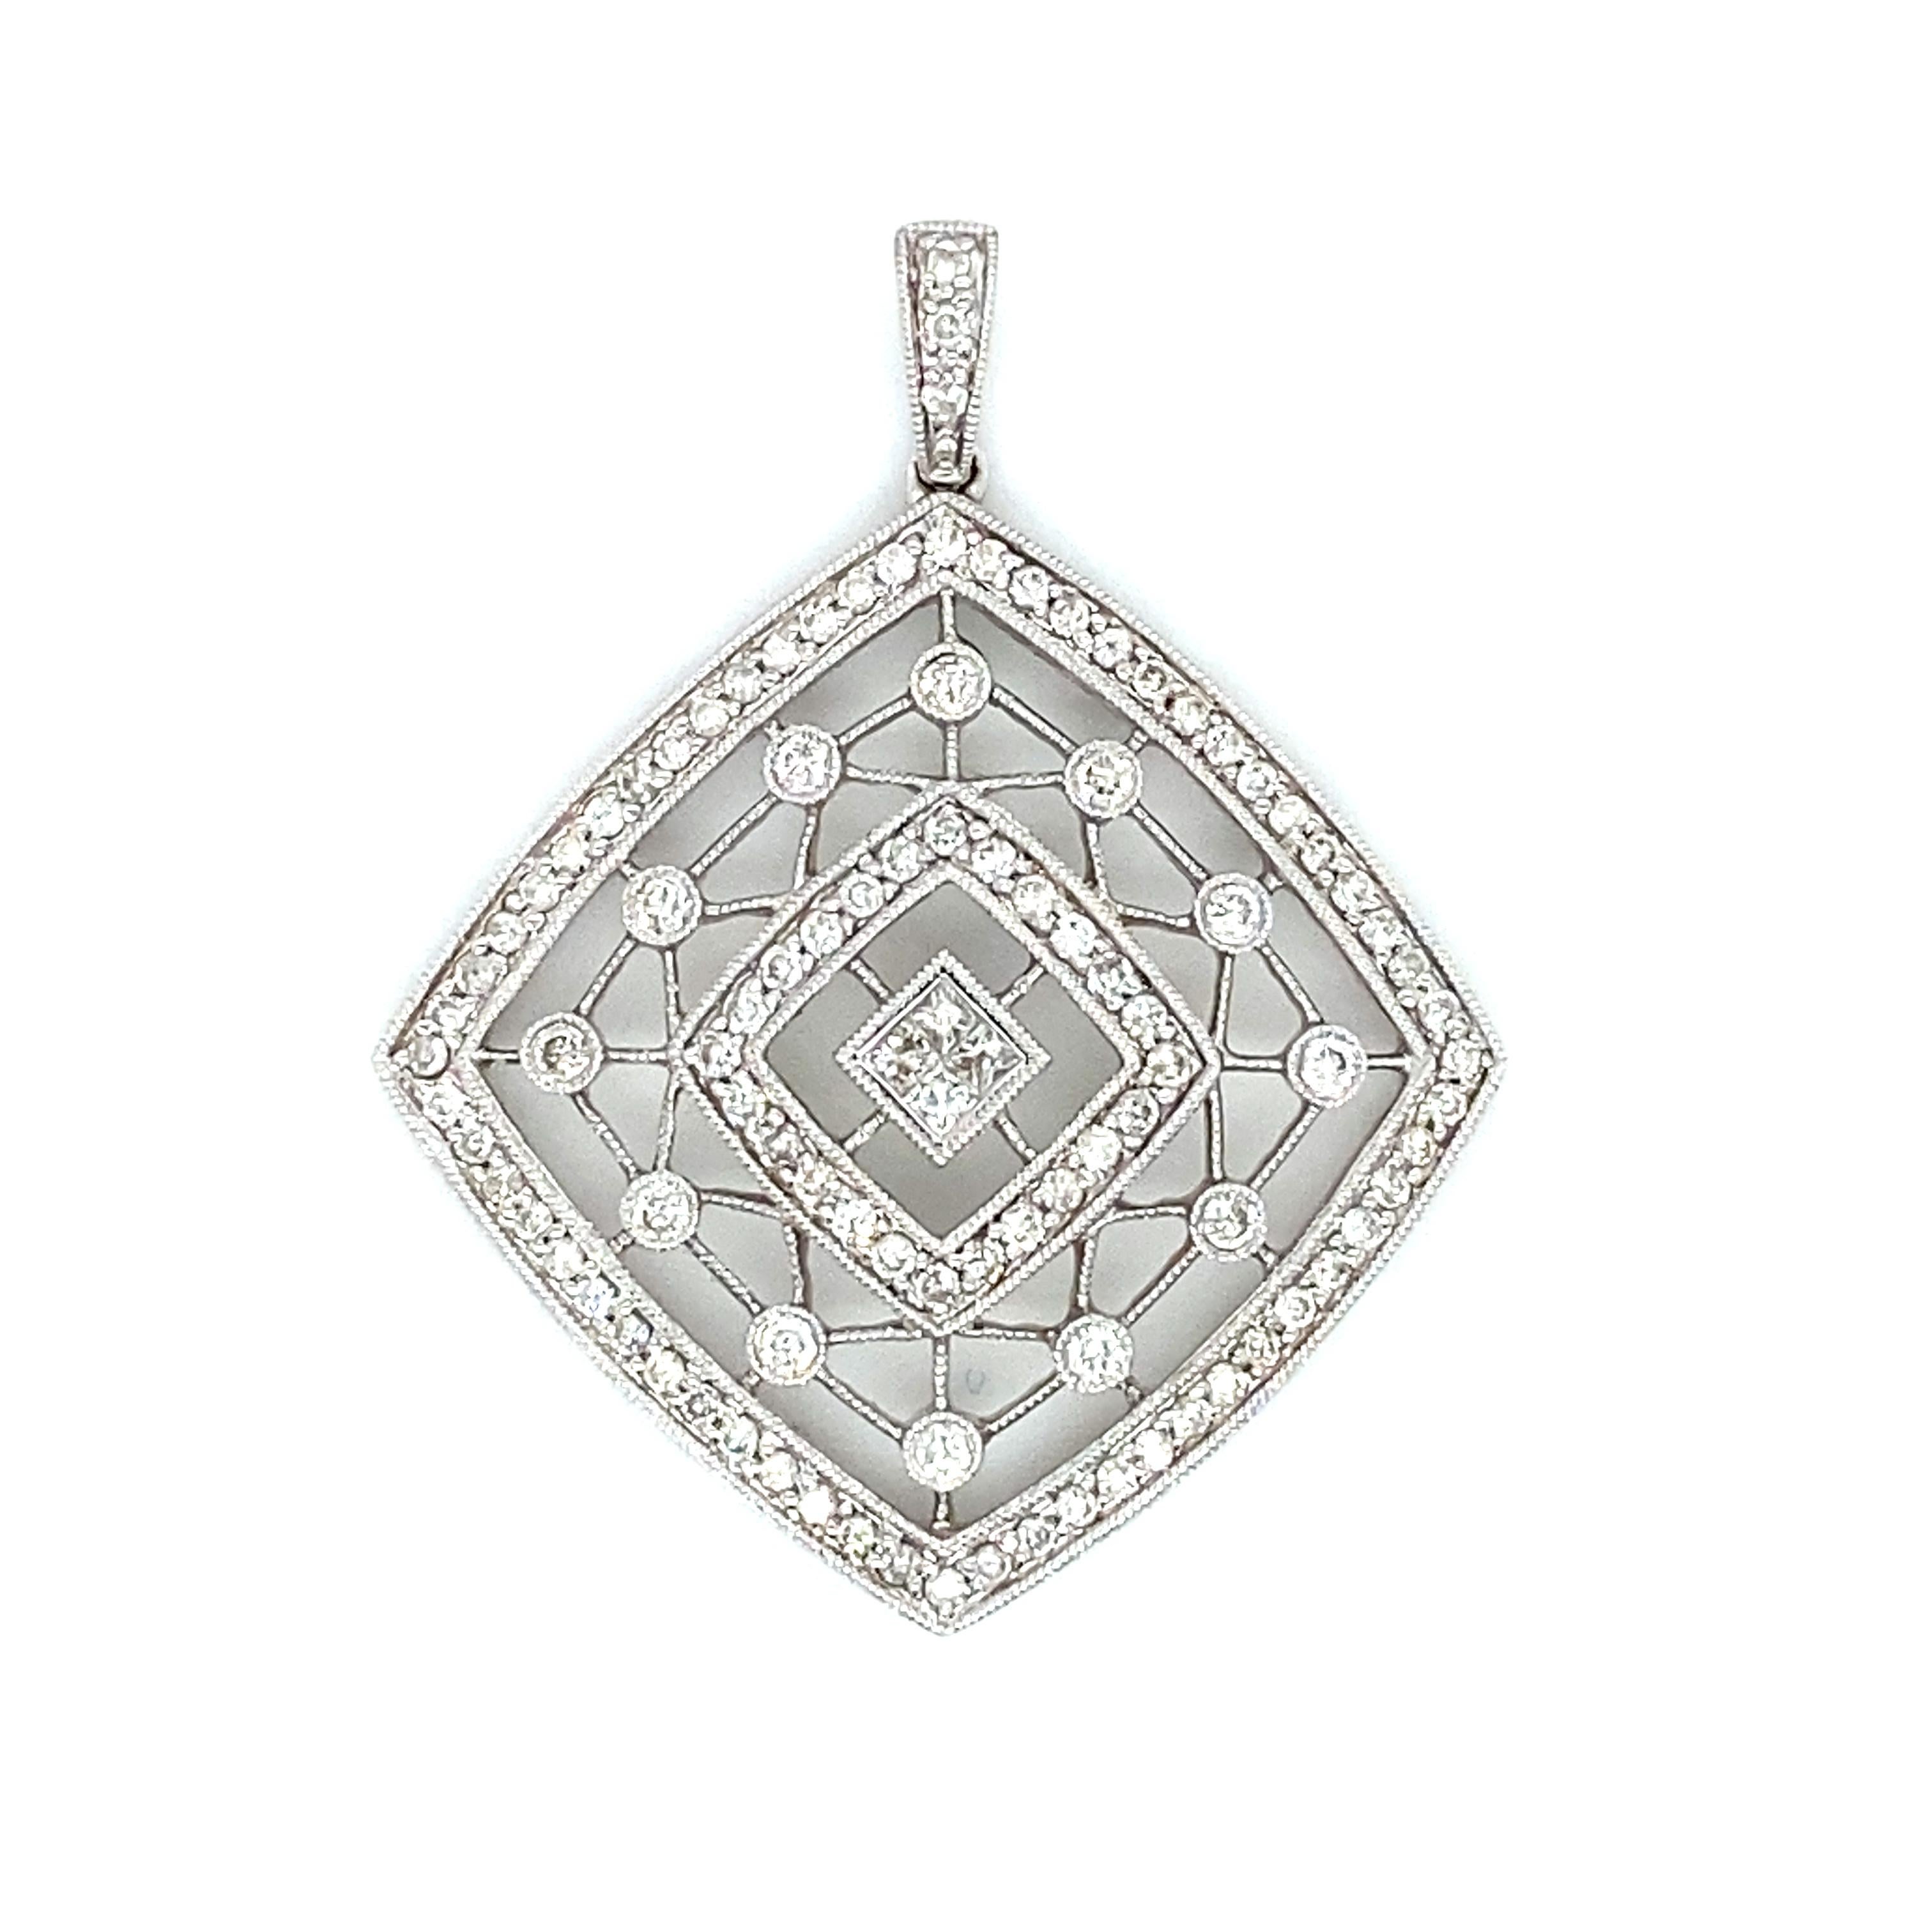 Item Details: This unique pendant has a square design with filigree and round diamond accents.

Circa: 2000s
Metal Type: 18 karat white gold
Weight: 5.4 grams
Size: 1.5 inch

Diamond Details:

Carat: 0.50 carat total weight (Approximately)
Shape: